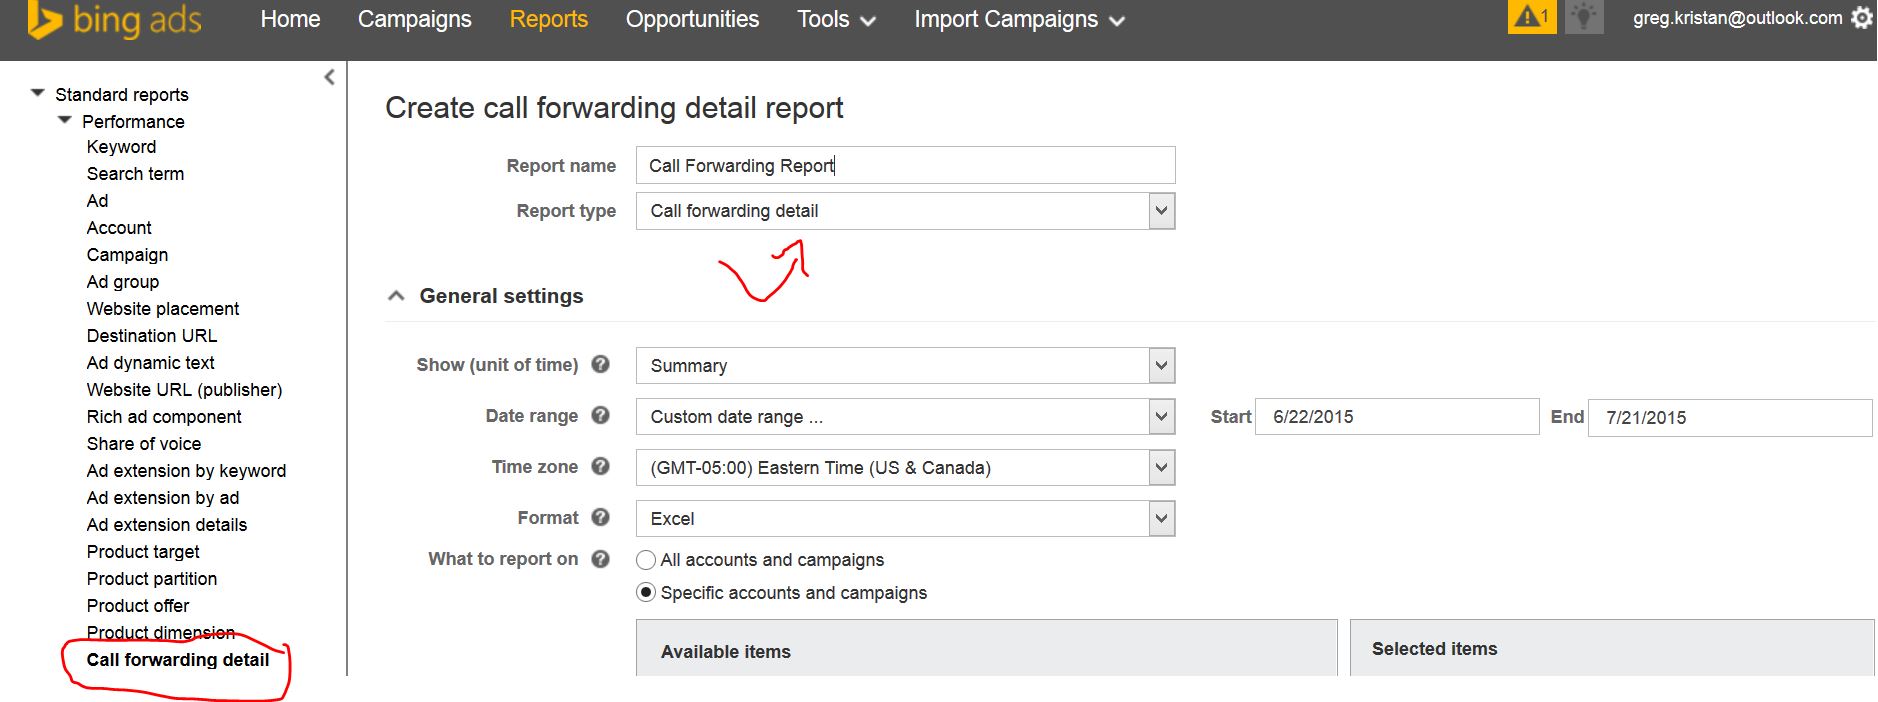 Call Forwarding Report in Bing Ads